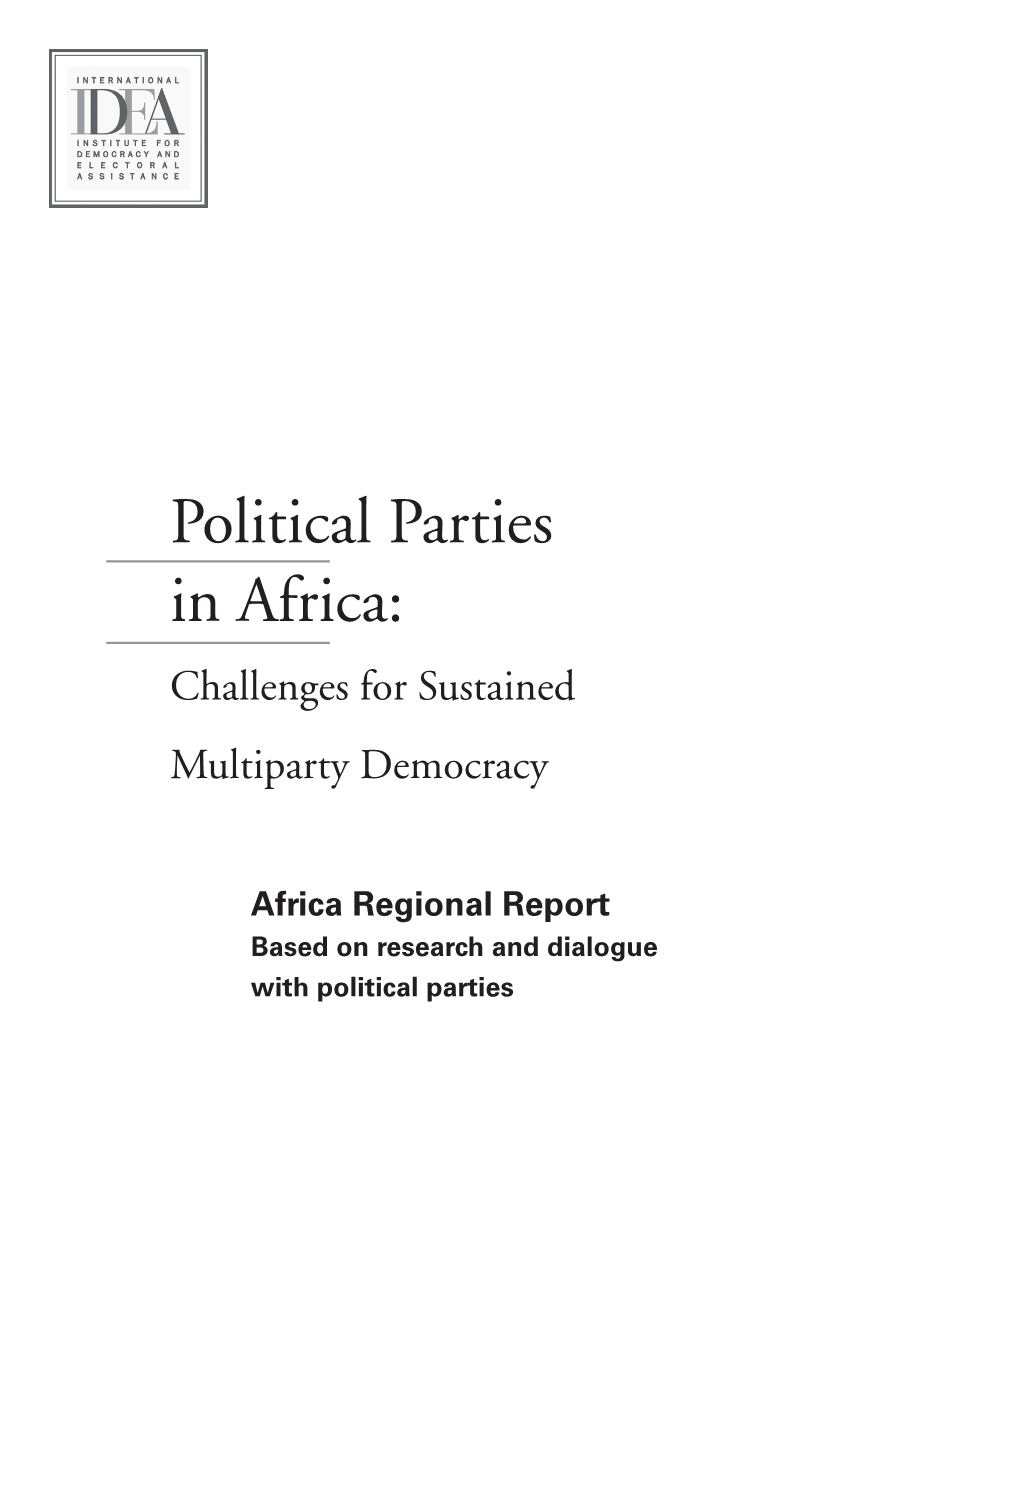 Political Parties in Africa: Challenges for Sustained Multiparty Democracy